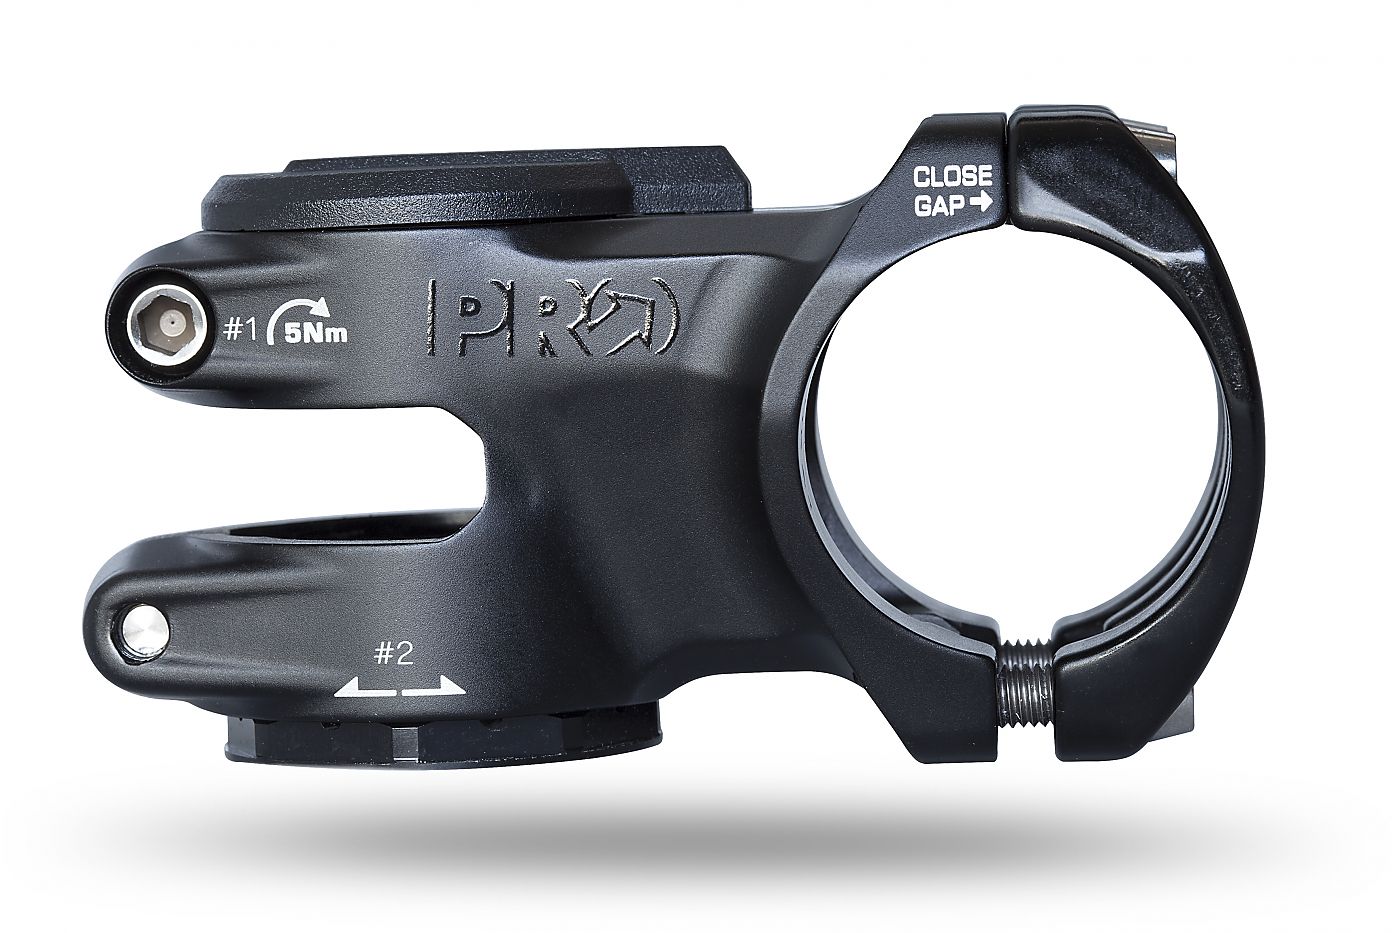 Shimano unveiling new PRO components at Eurobike | Bicycle Retailer Industry News